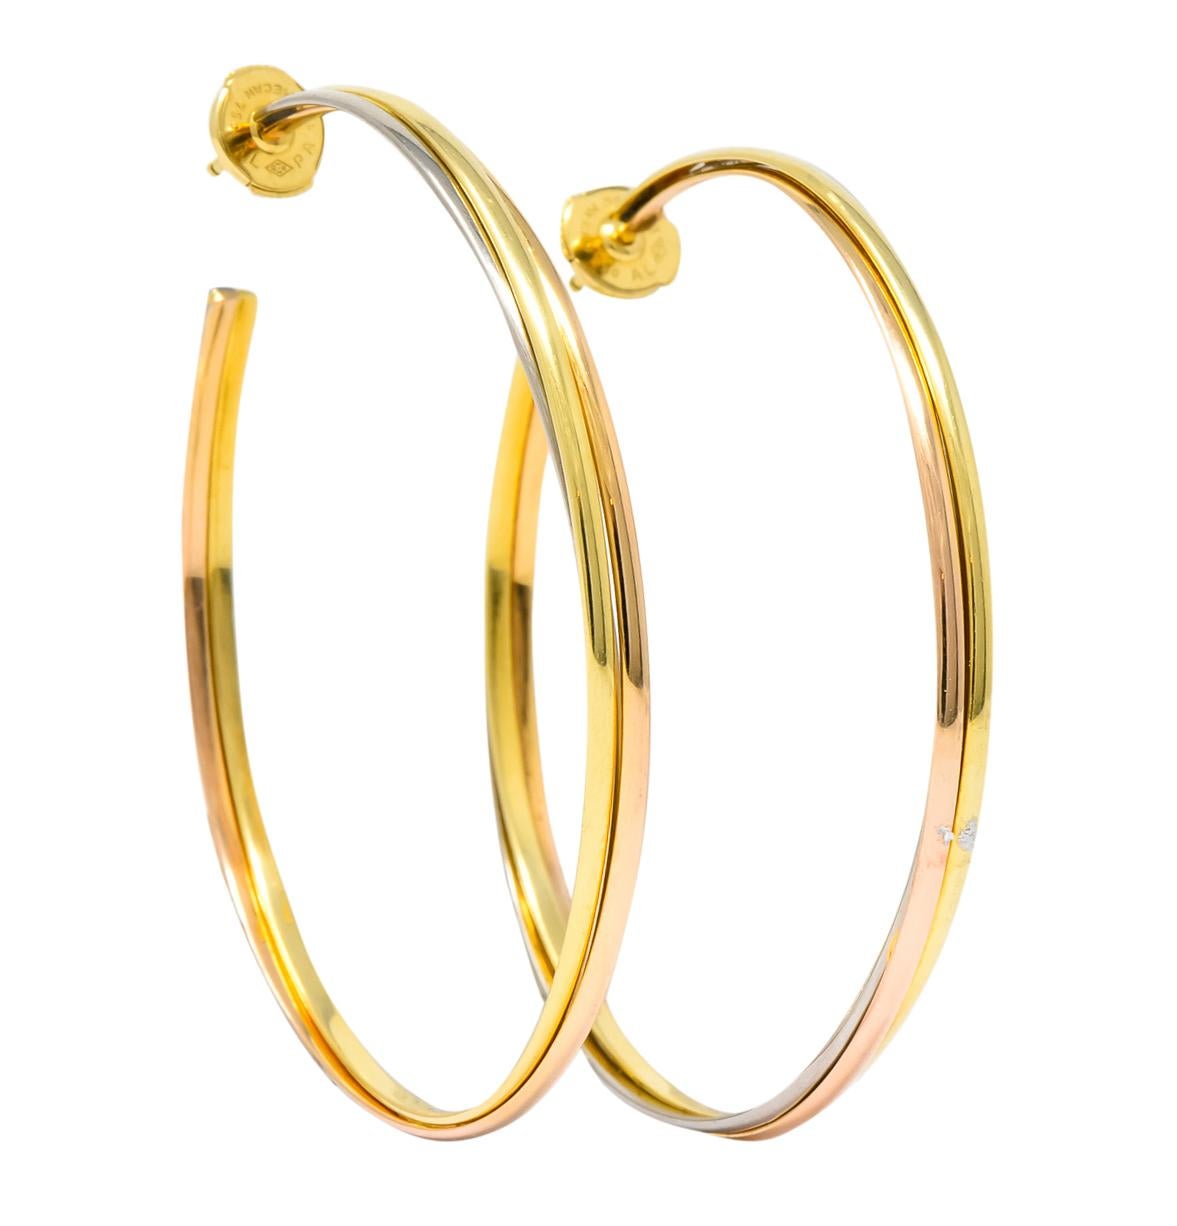 Large hoop style earrings comprised of three segments of intertwined yellow, white, and rose gold

With a high polish finish

Completed by posts and la pousette backs

From Cartier's Trinity collection

Fully signed Cartier with 750 stamp for 18